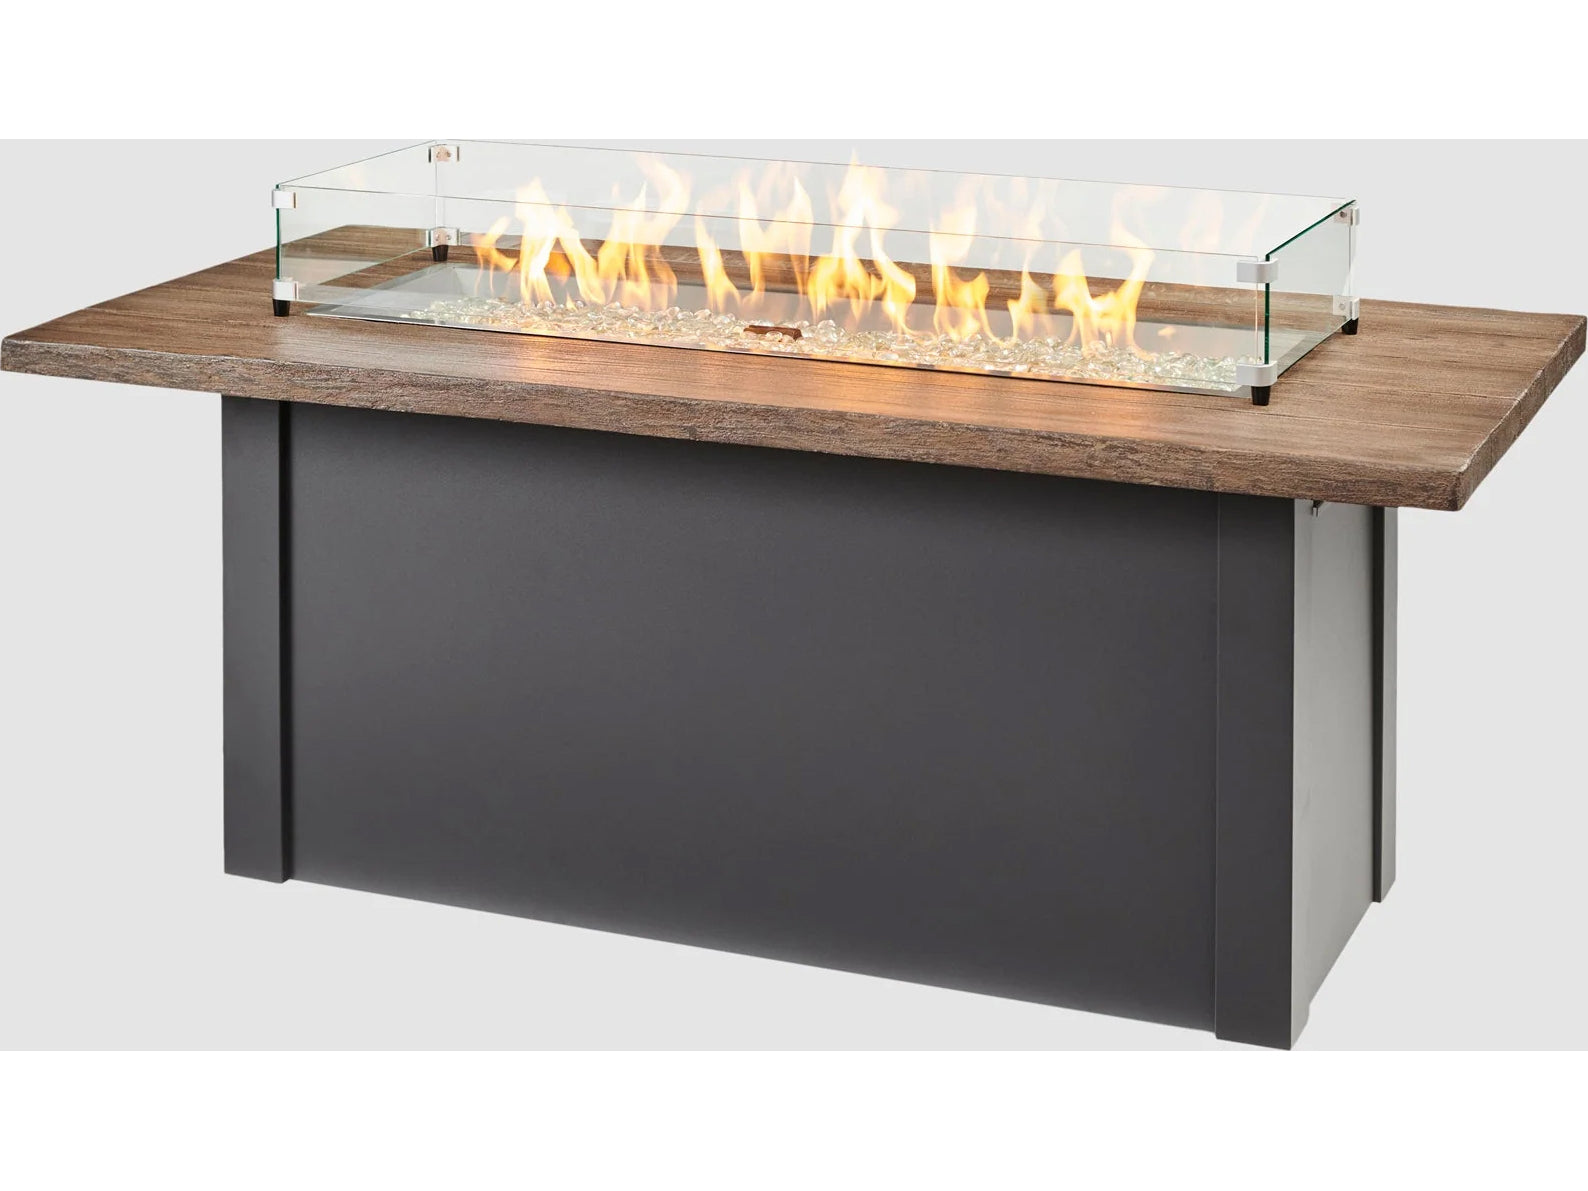 Outdoor Greatroom - 62’‘W x 30’'D - Havenwood Steel Graphite Grey Rectangular Driftwood Everblend Top Gas Fire Pit Table with Direct Spark Ignition